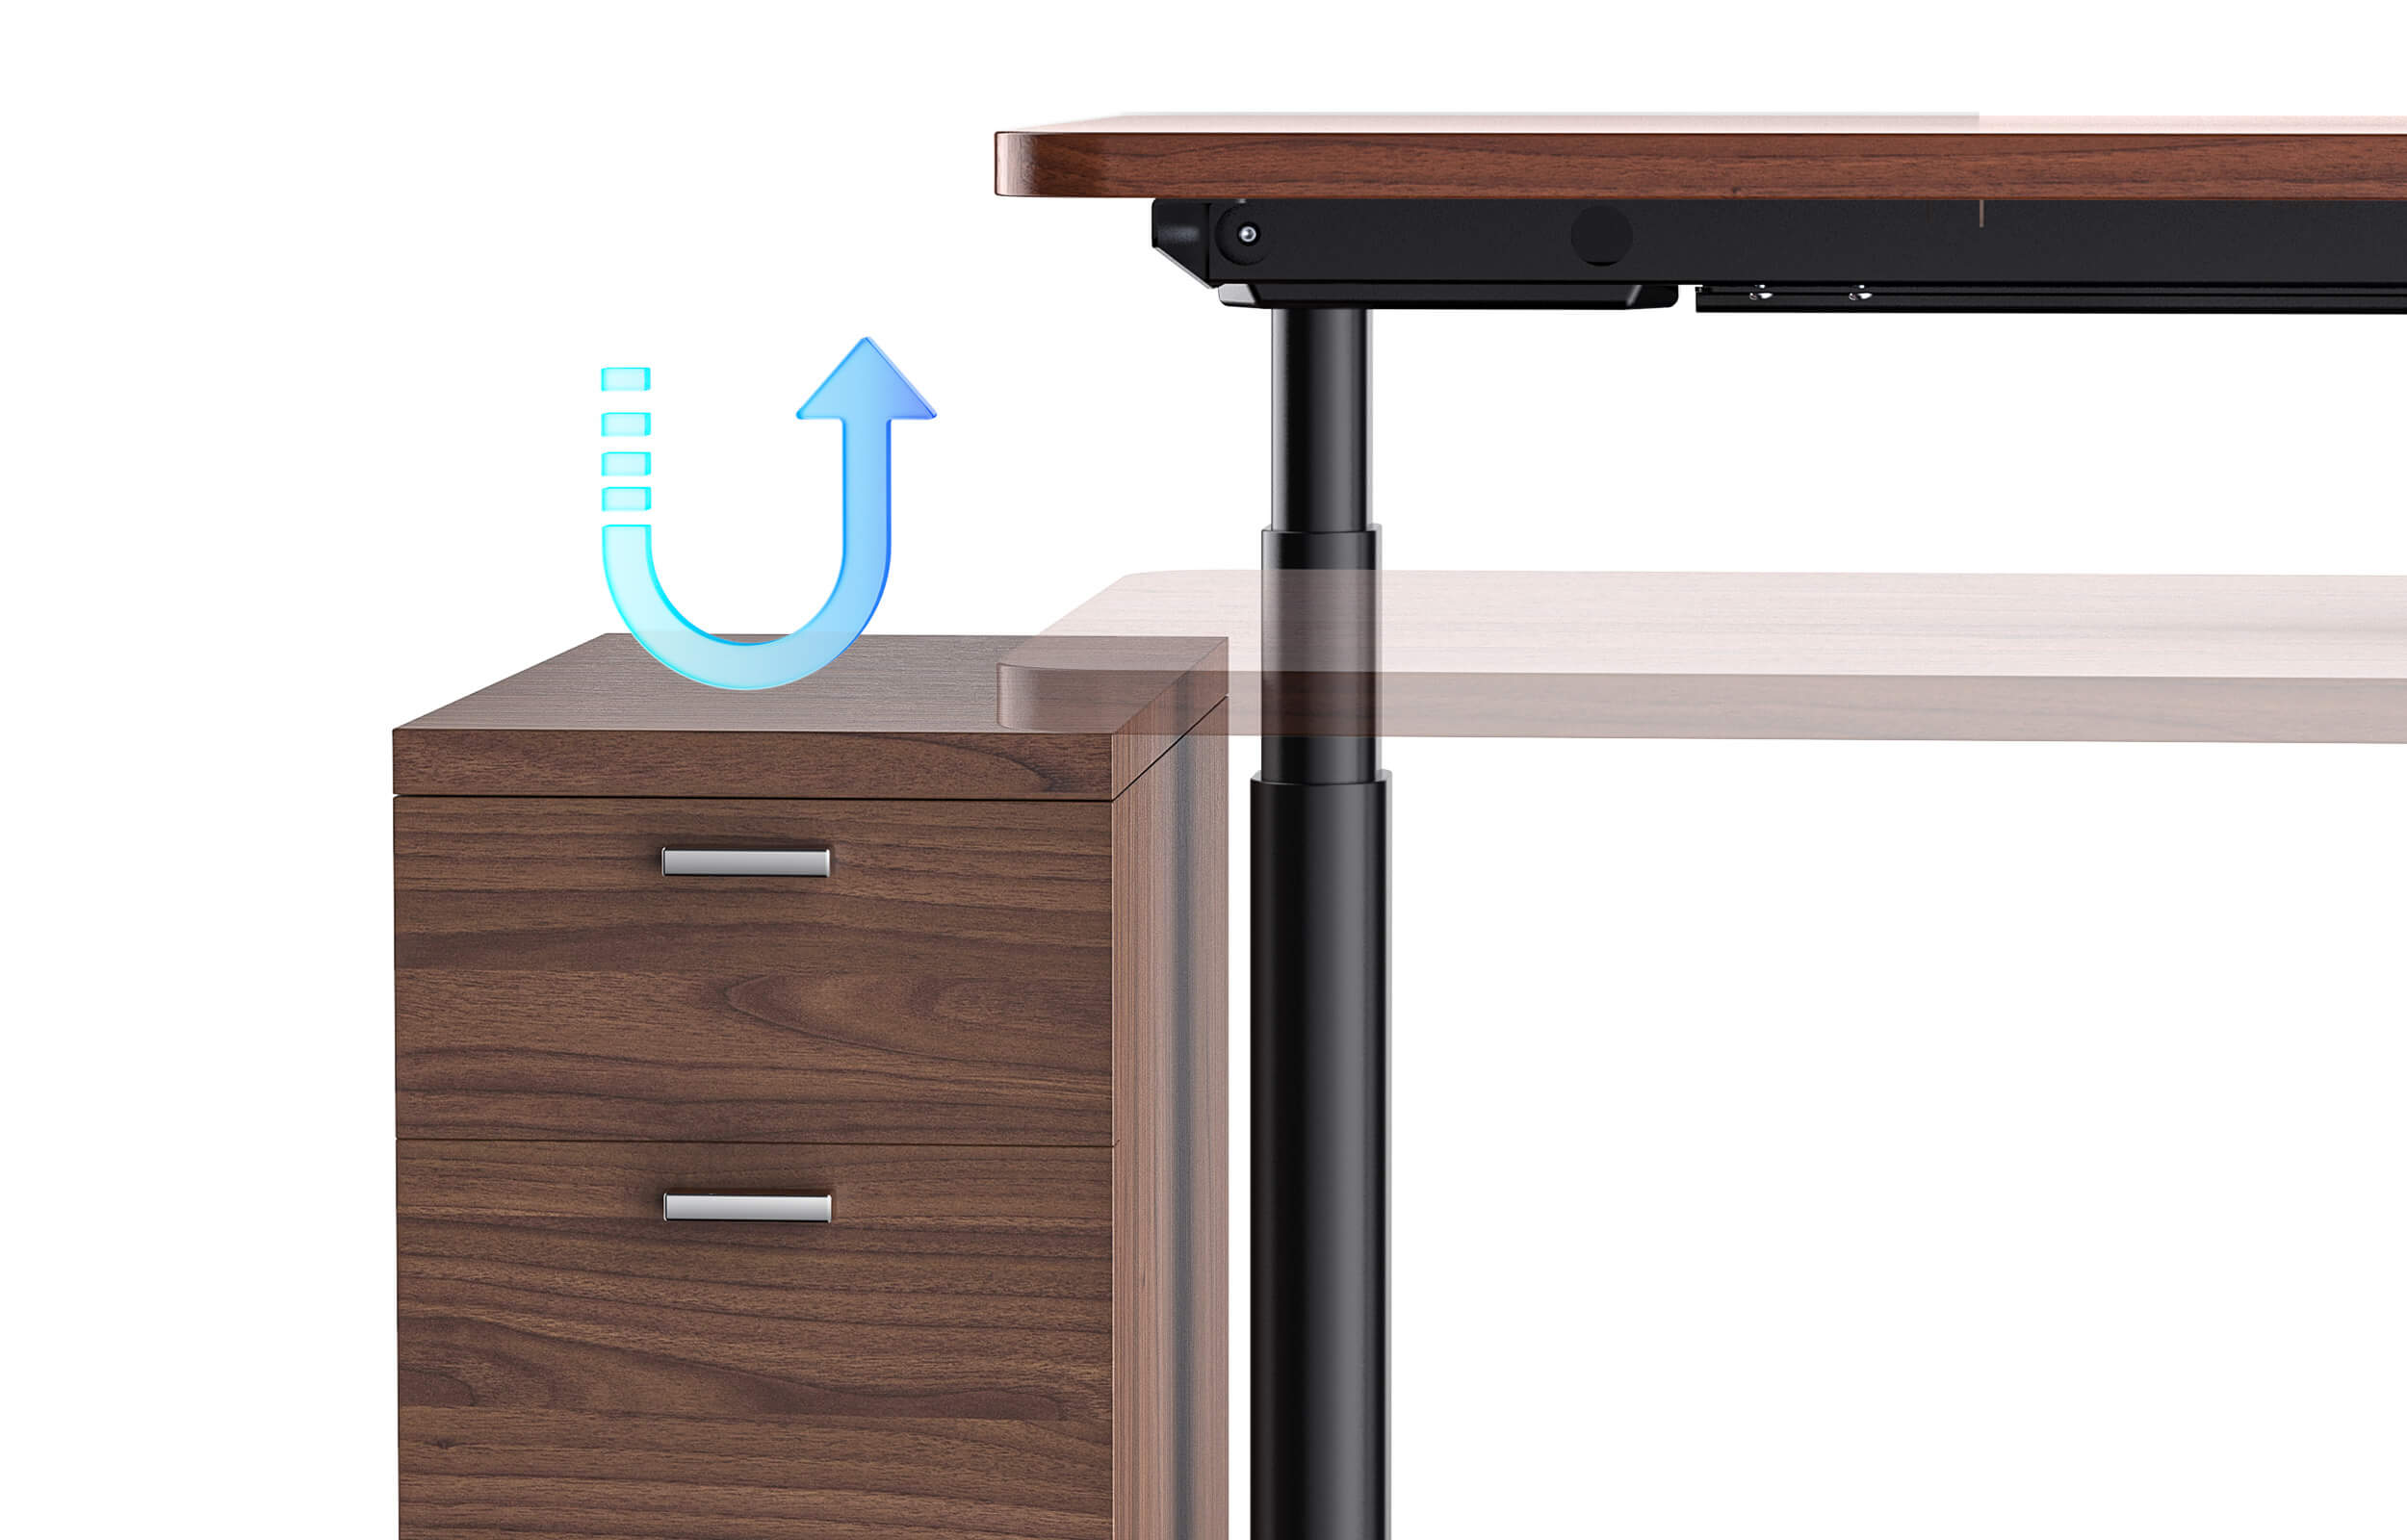 Maidesite TH2 Pro Plus electric standing desk comes built in anti-collision system to protect furnitures and pets